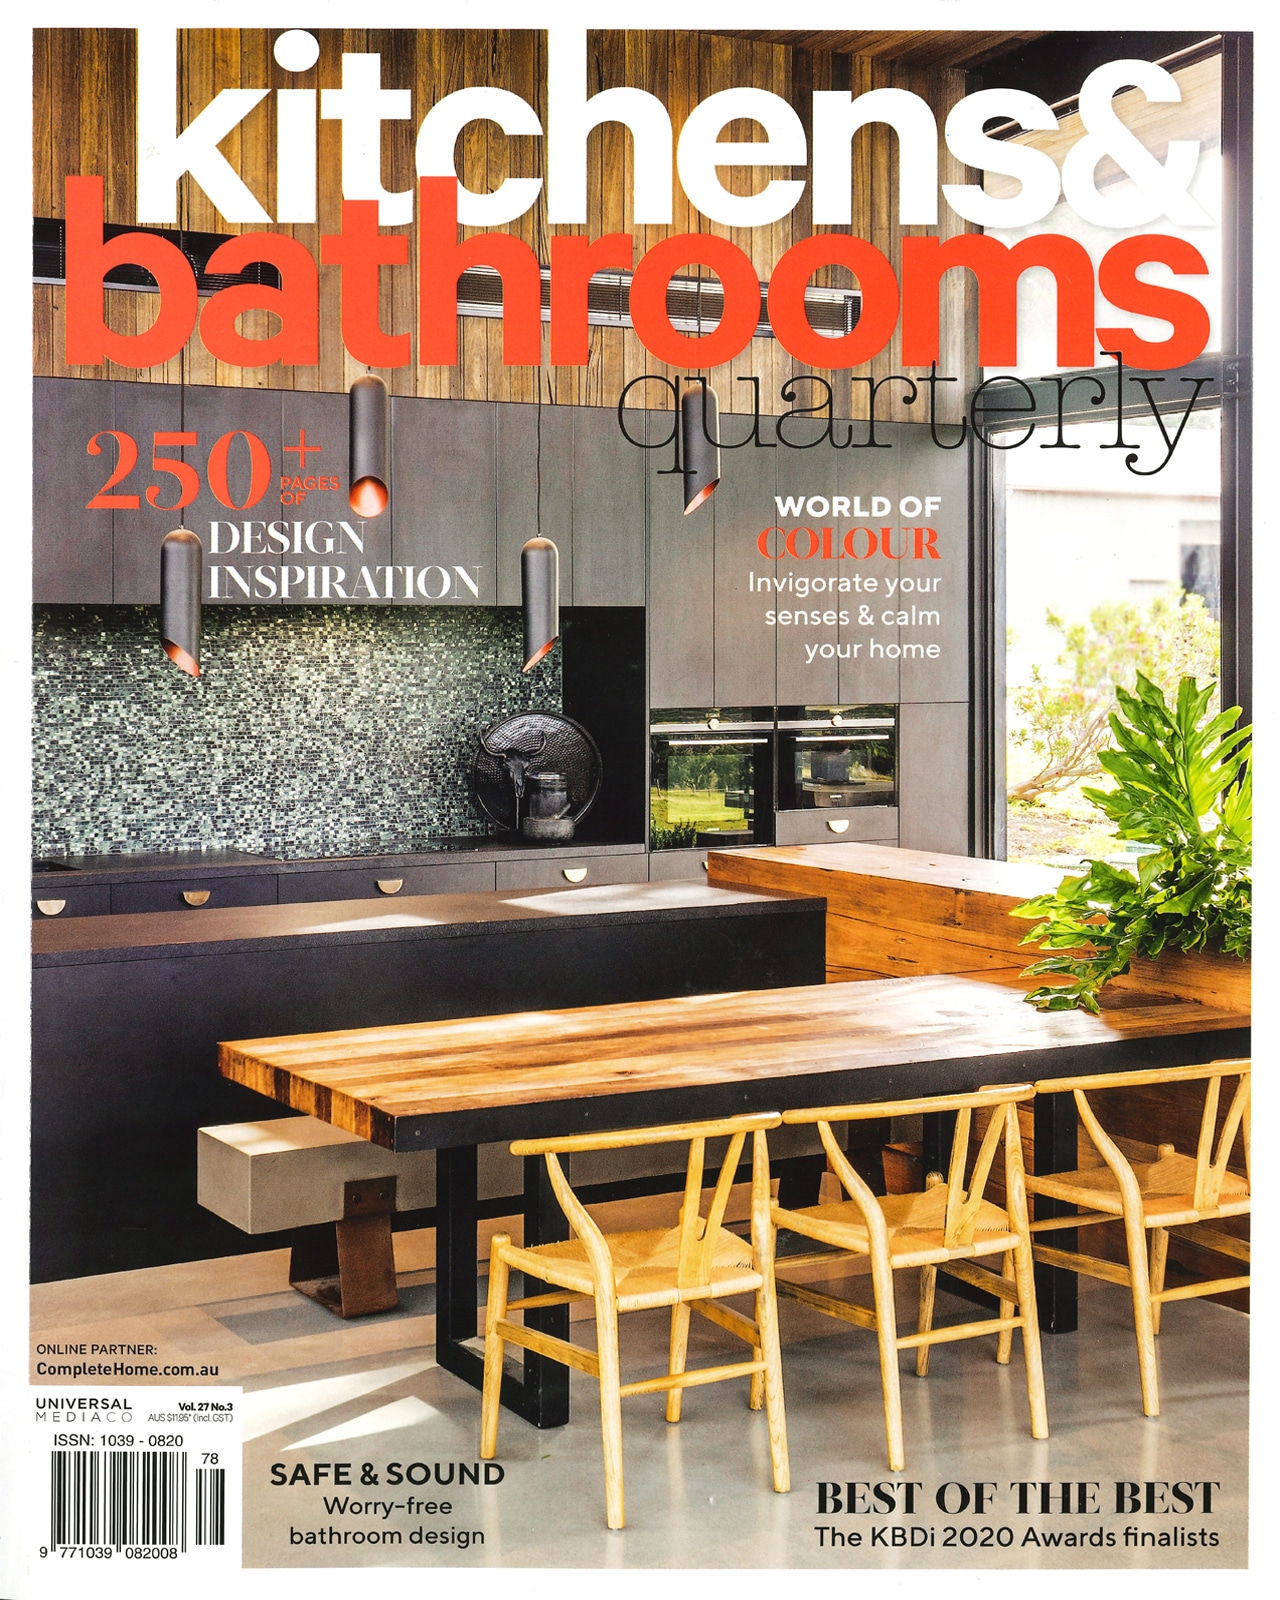 Studio Black Interiors is proudly featured in the October edition of Kitchens and Bathroom Quarterly October 2020.